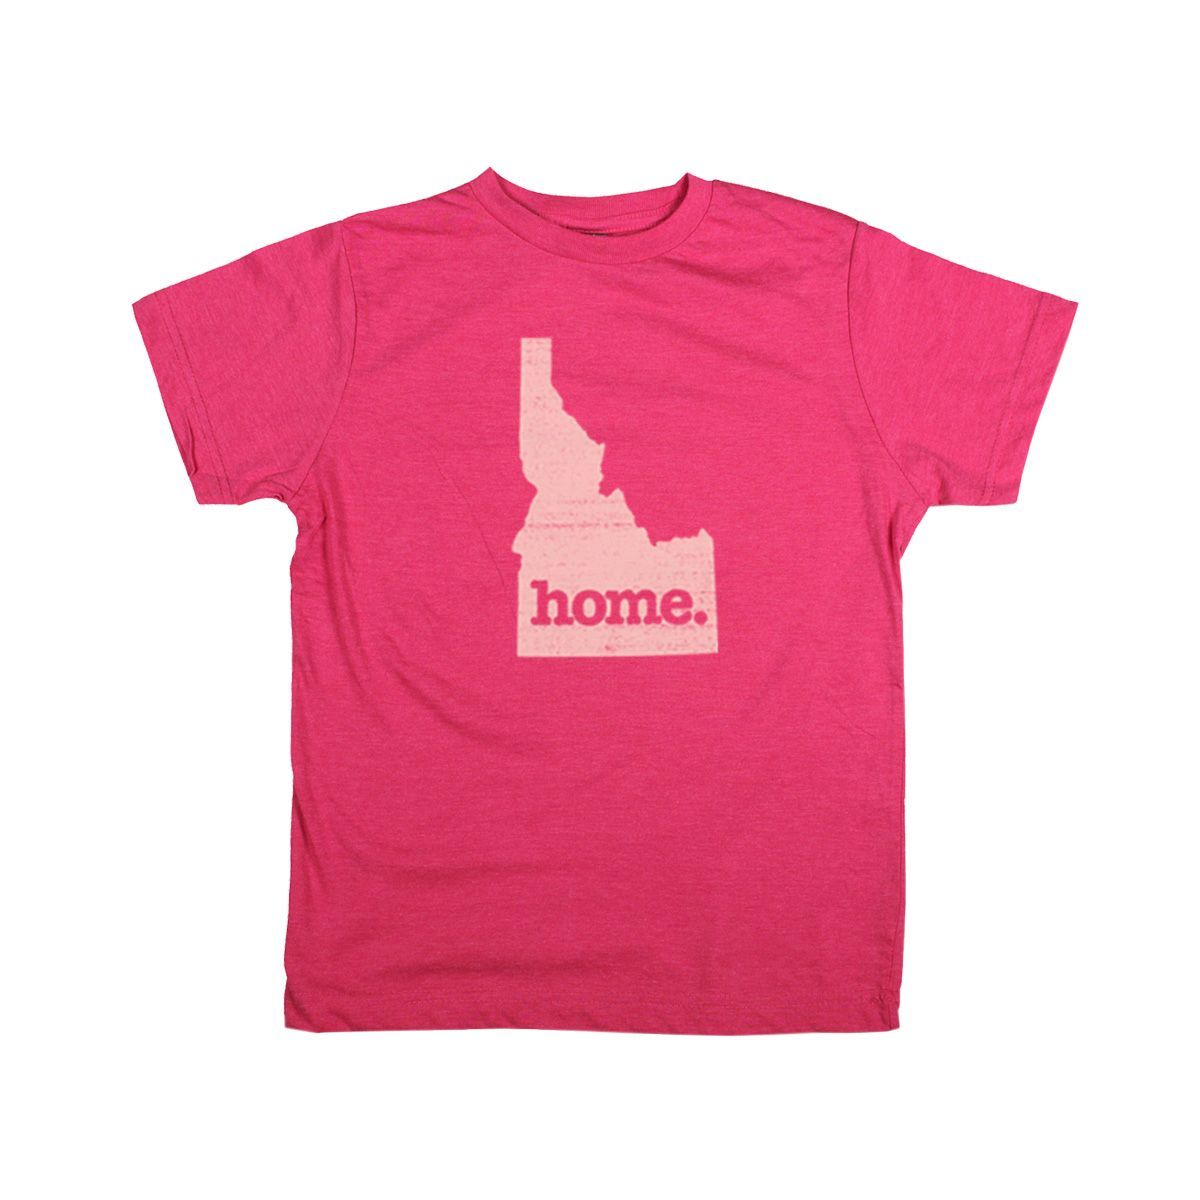 home. Youth/Toddler T-Shirt - Pennsylvania